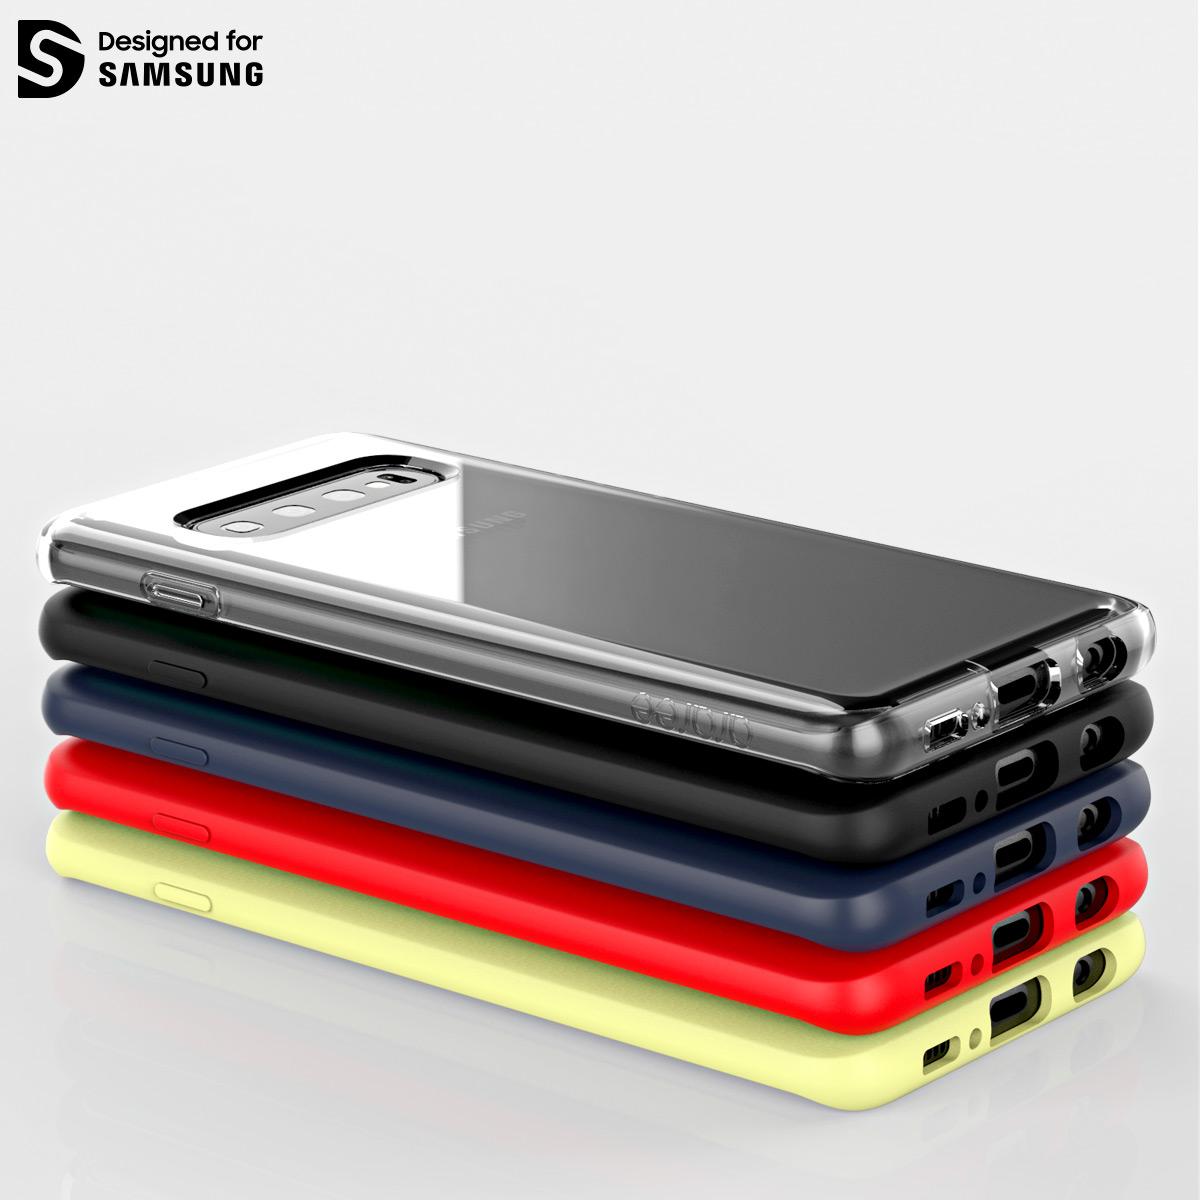 Araree-A-Fit-for-Samsung-Galaxy-S10-664048665_PH-1900872709